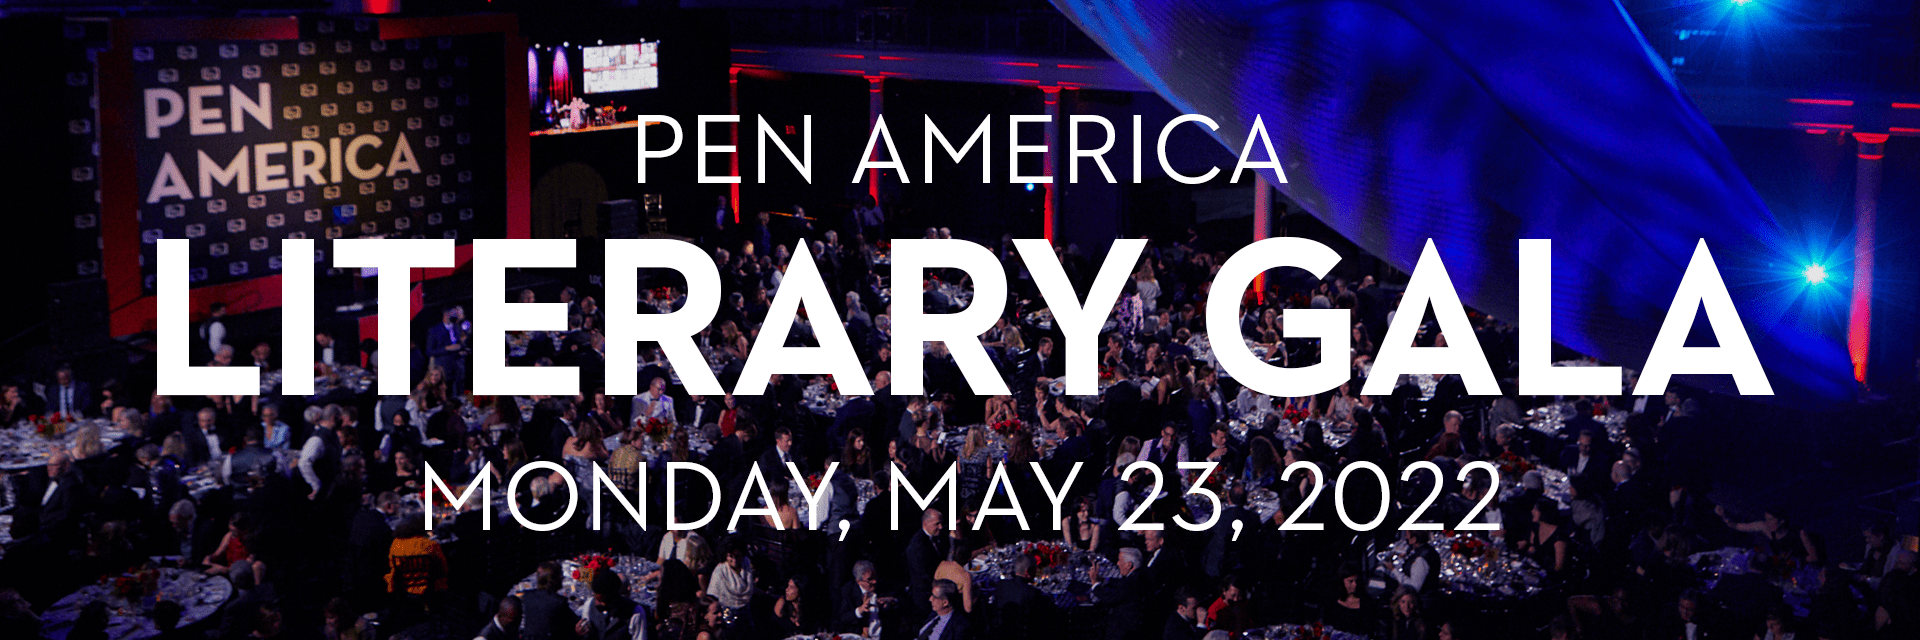 Photo from 2021 PEN America Literary Gala in background; on top: “PEN America Literary Gala. Monday, May 23, 2022”